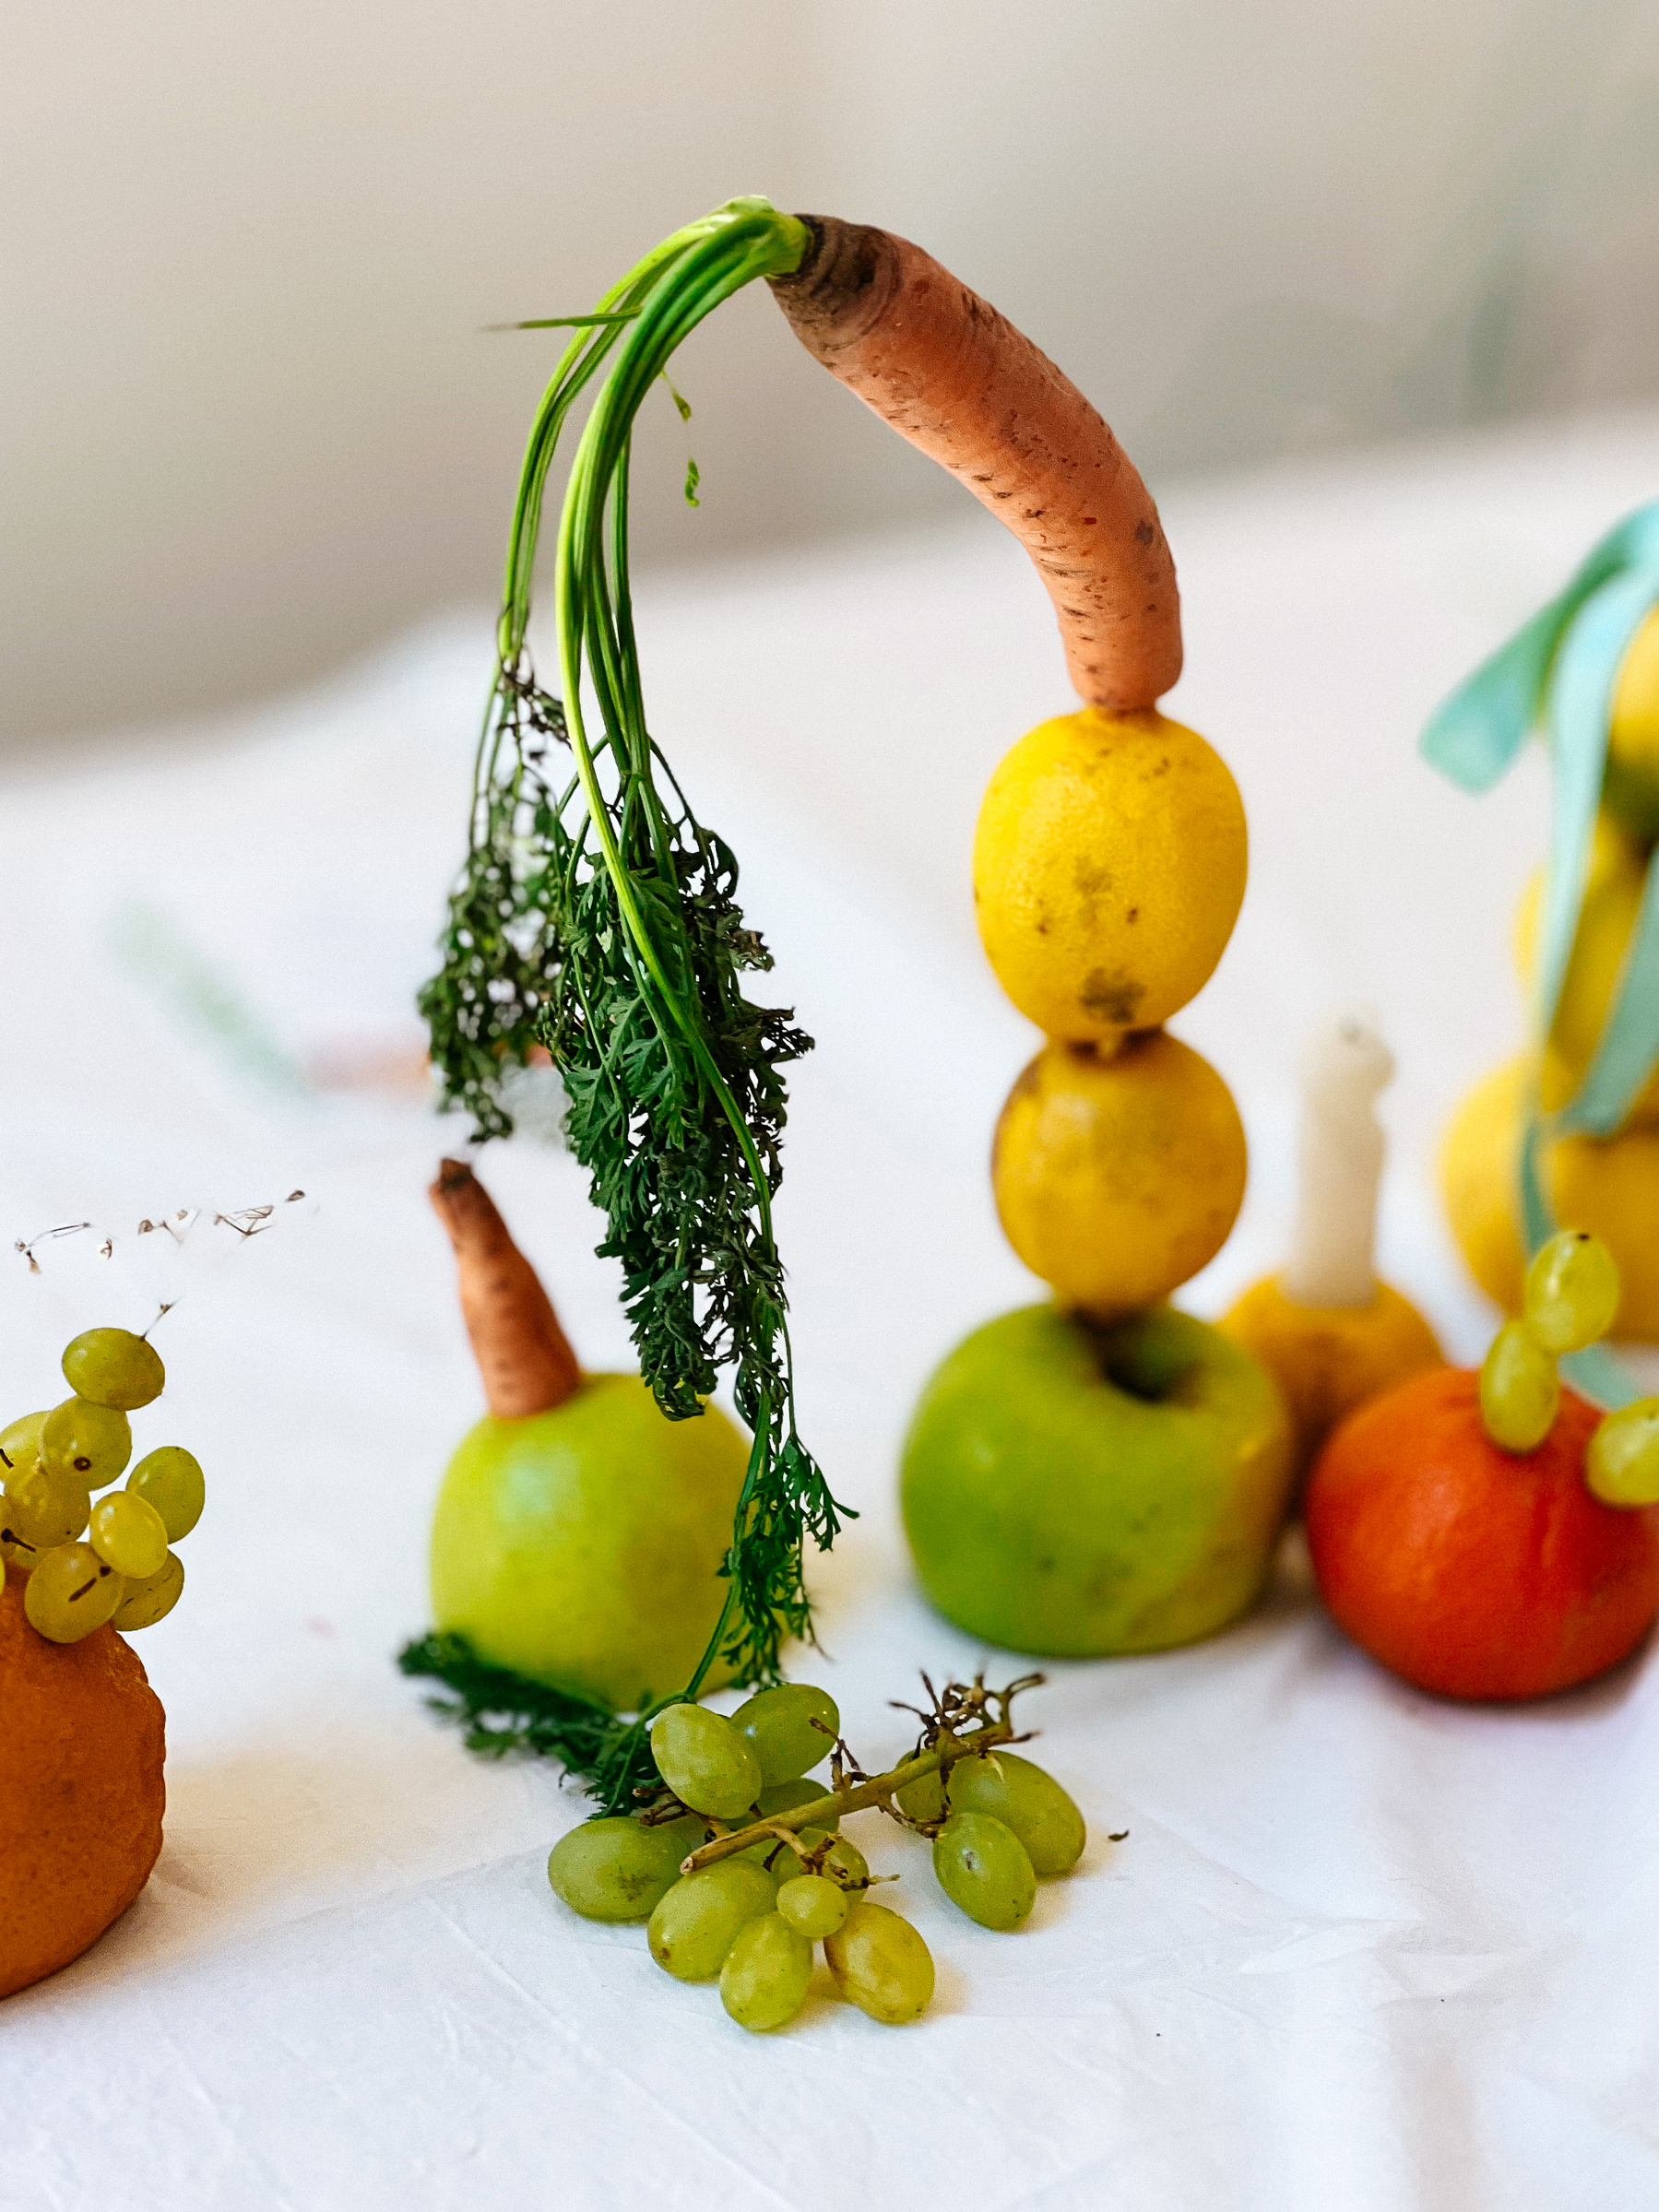 A carrot and some apples, arranged, like a sculpture. Some grapes as well. 